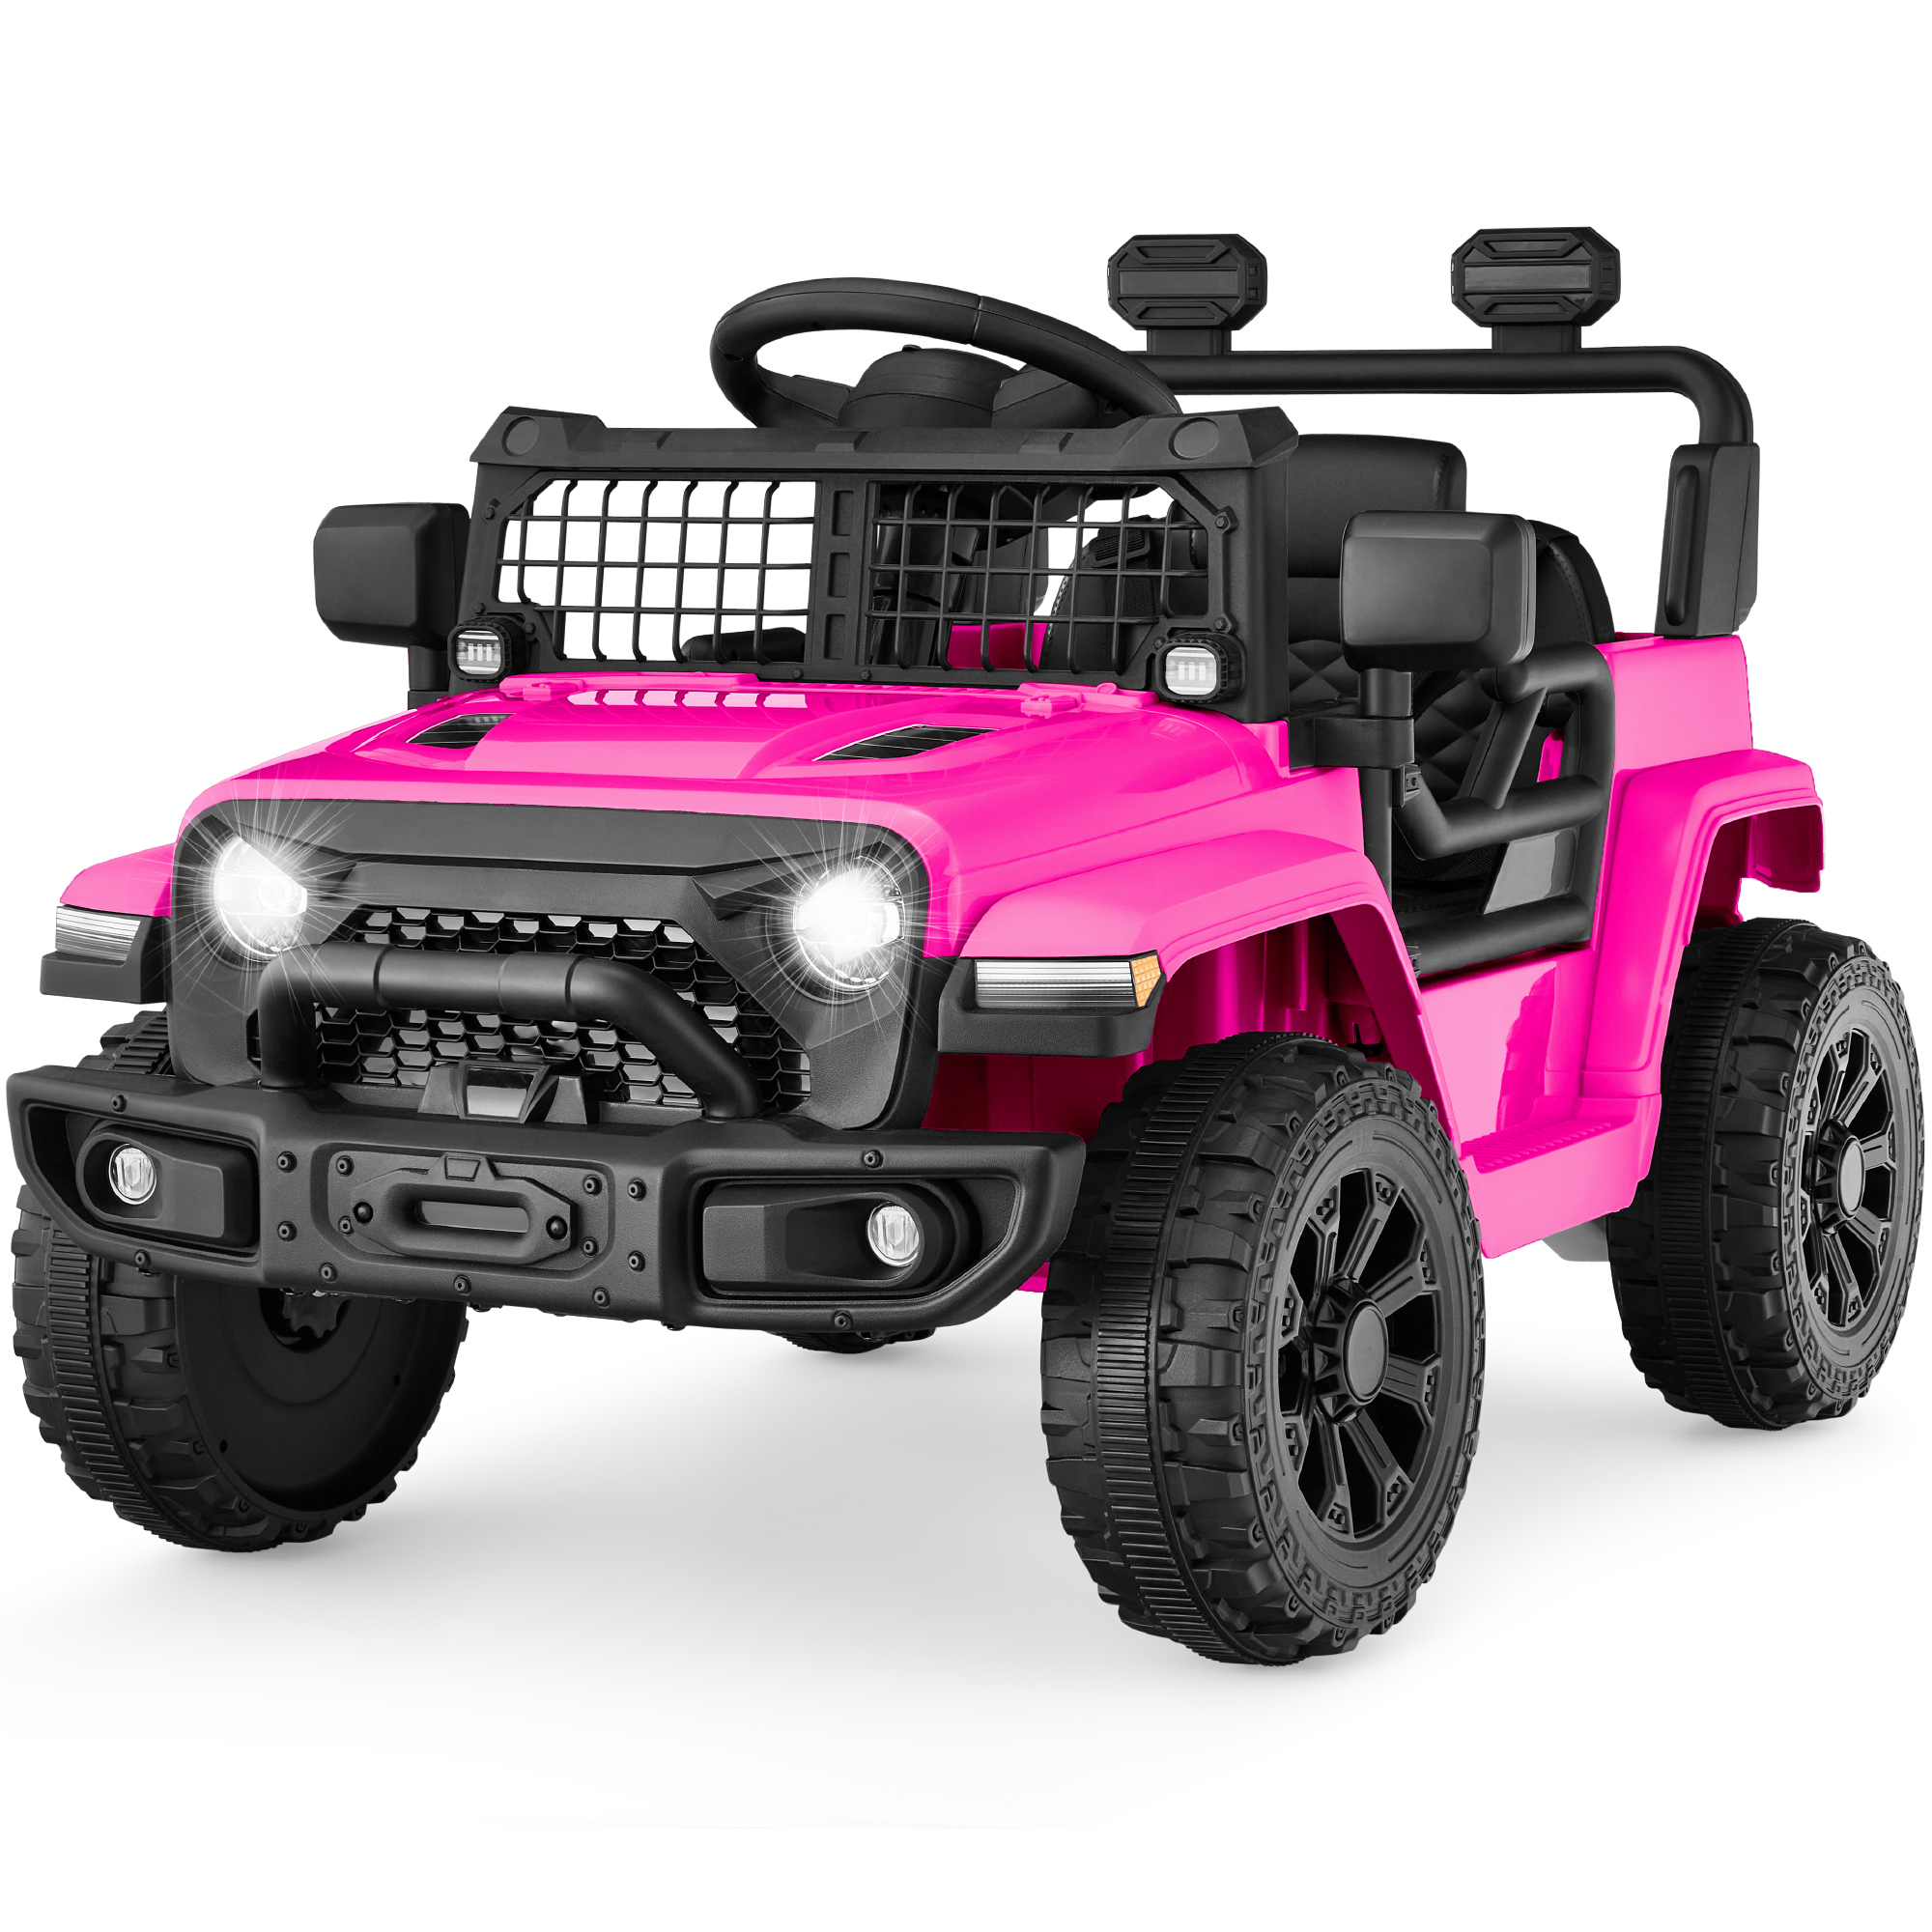 Best Choice Products 6V Kids Ride-On Truck Car w/ Parent Remote Control, 4-Wheel Suspension, LED Lights - Hot Pink - image 1 of 8